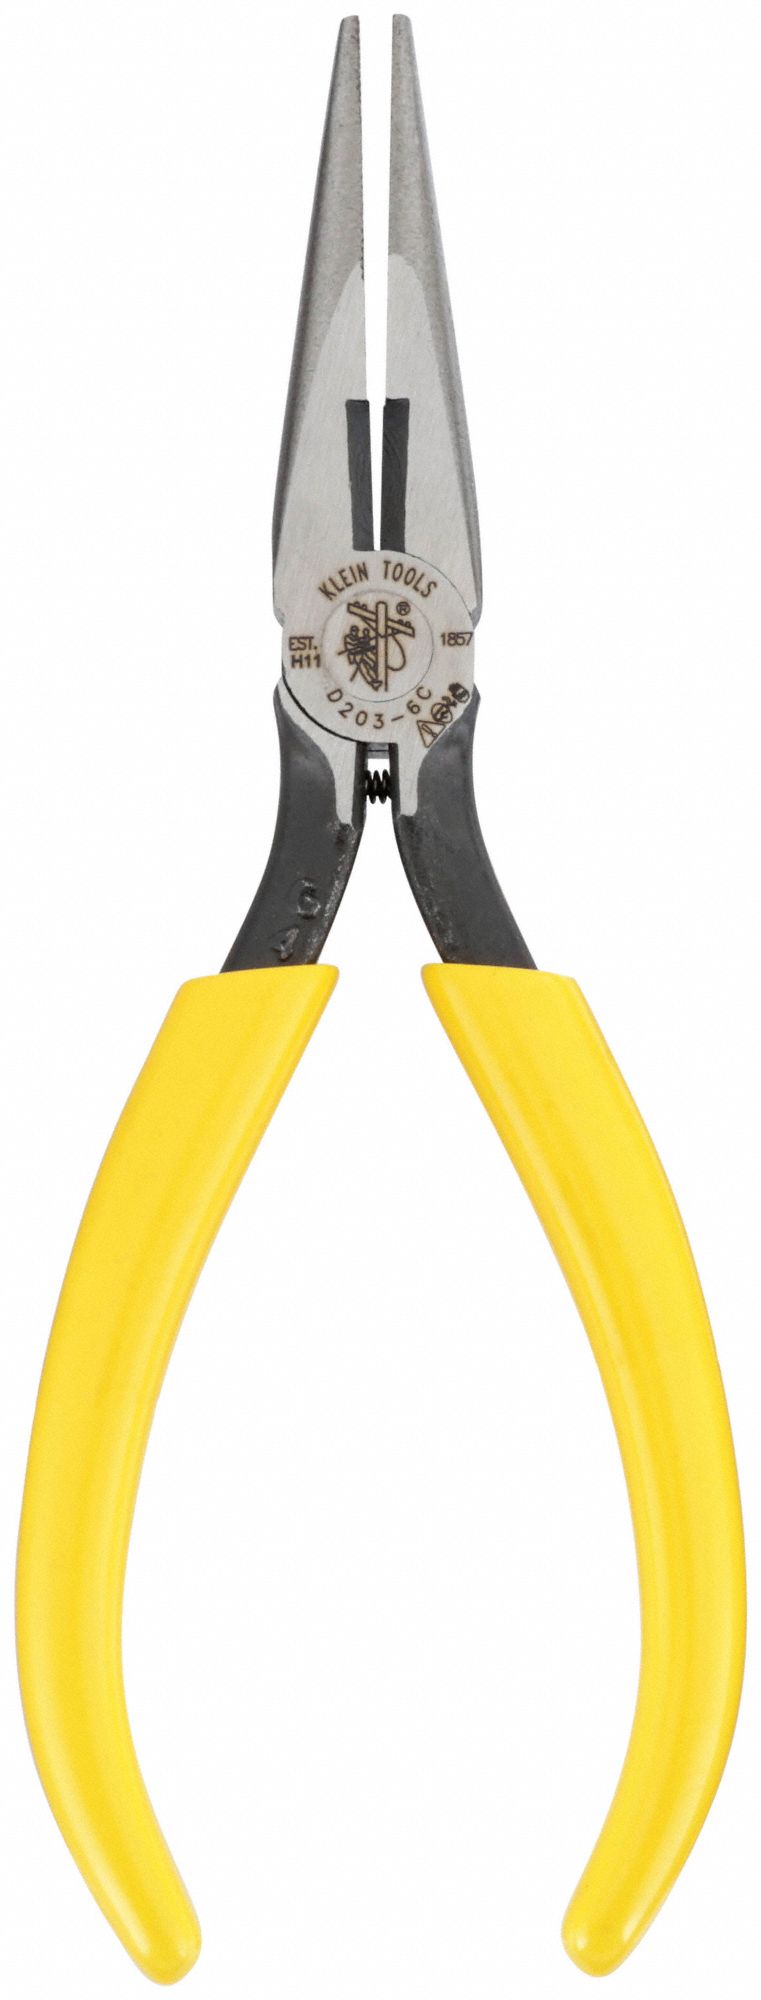 KLEIN TOOLS LONG-NOSE PLIERS SIDE CUTTERS 6-5/8 - Needle, Bent and